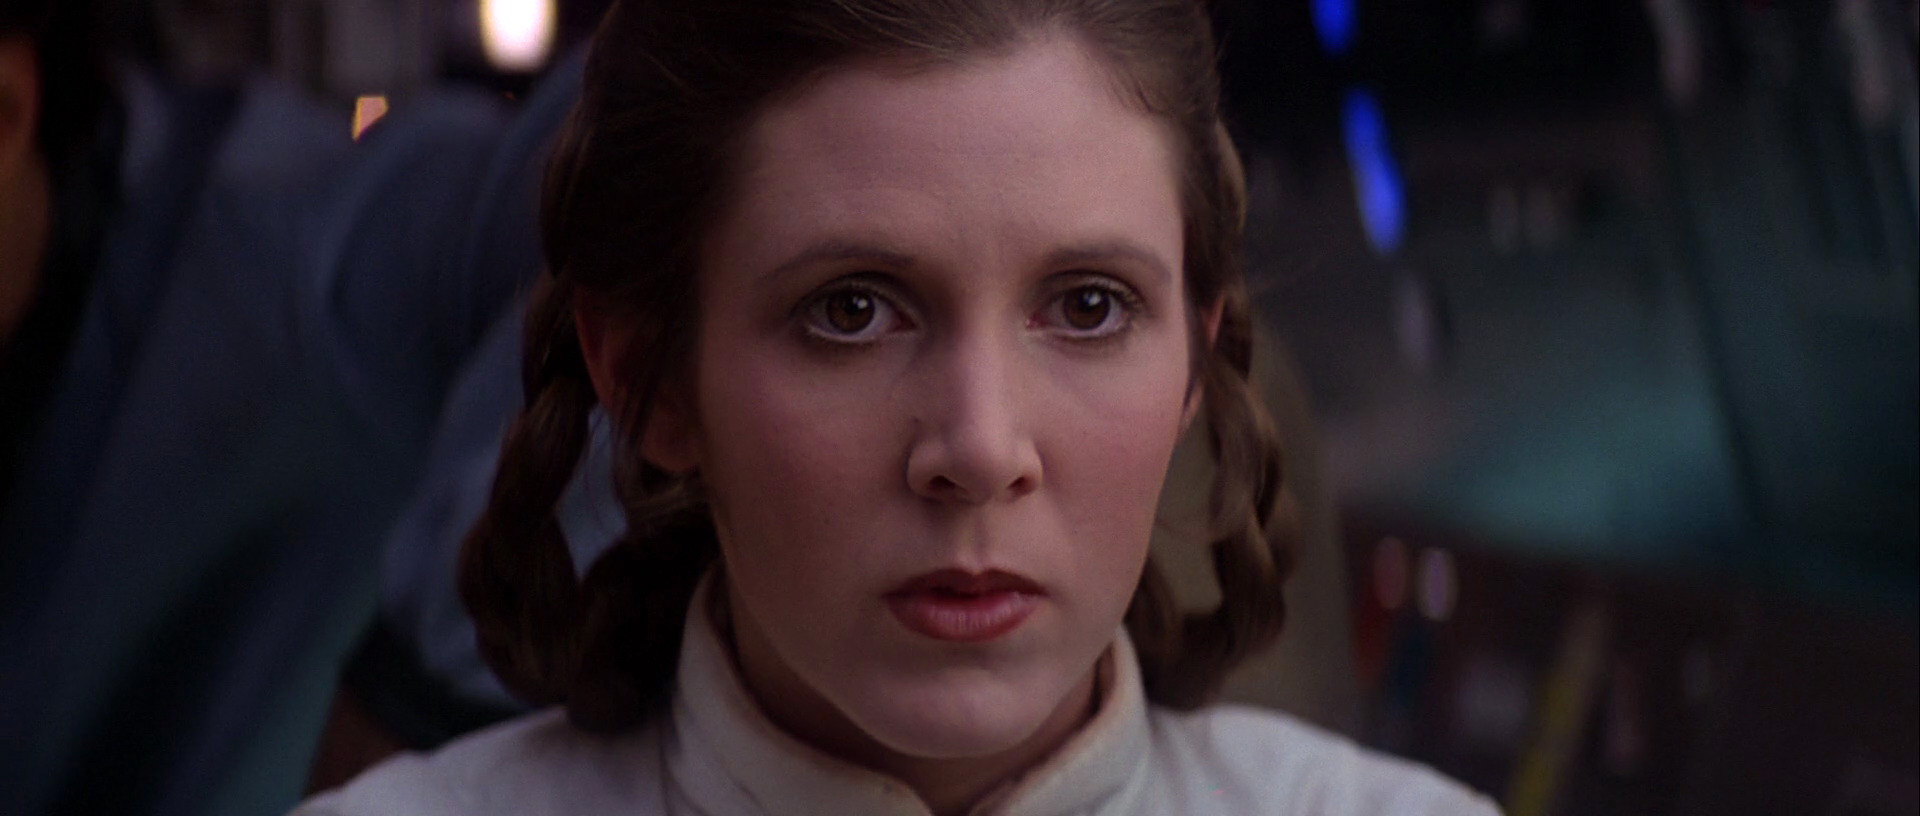 Star Wars: The Force Awakens - Here's What Happened To Princess Leia After Return of the Jedi